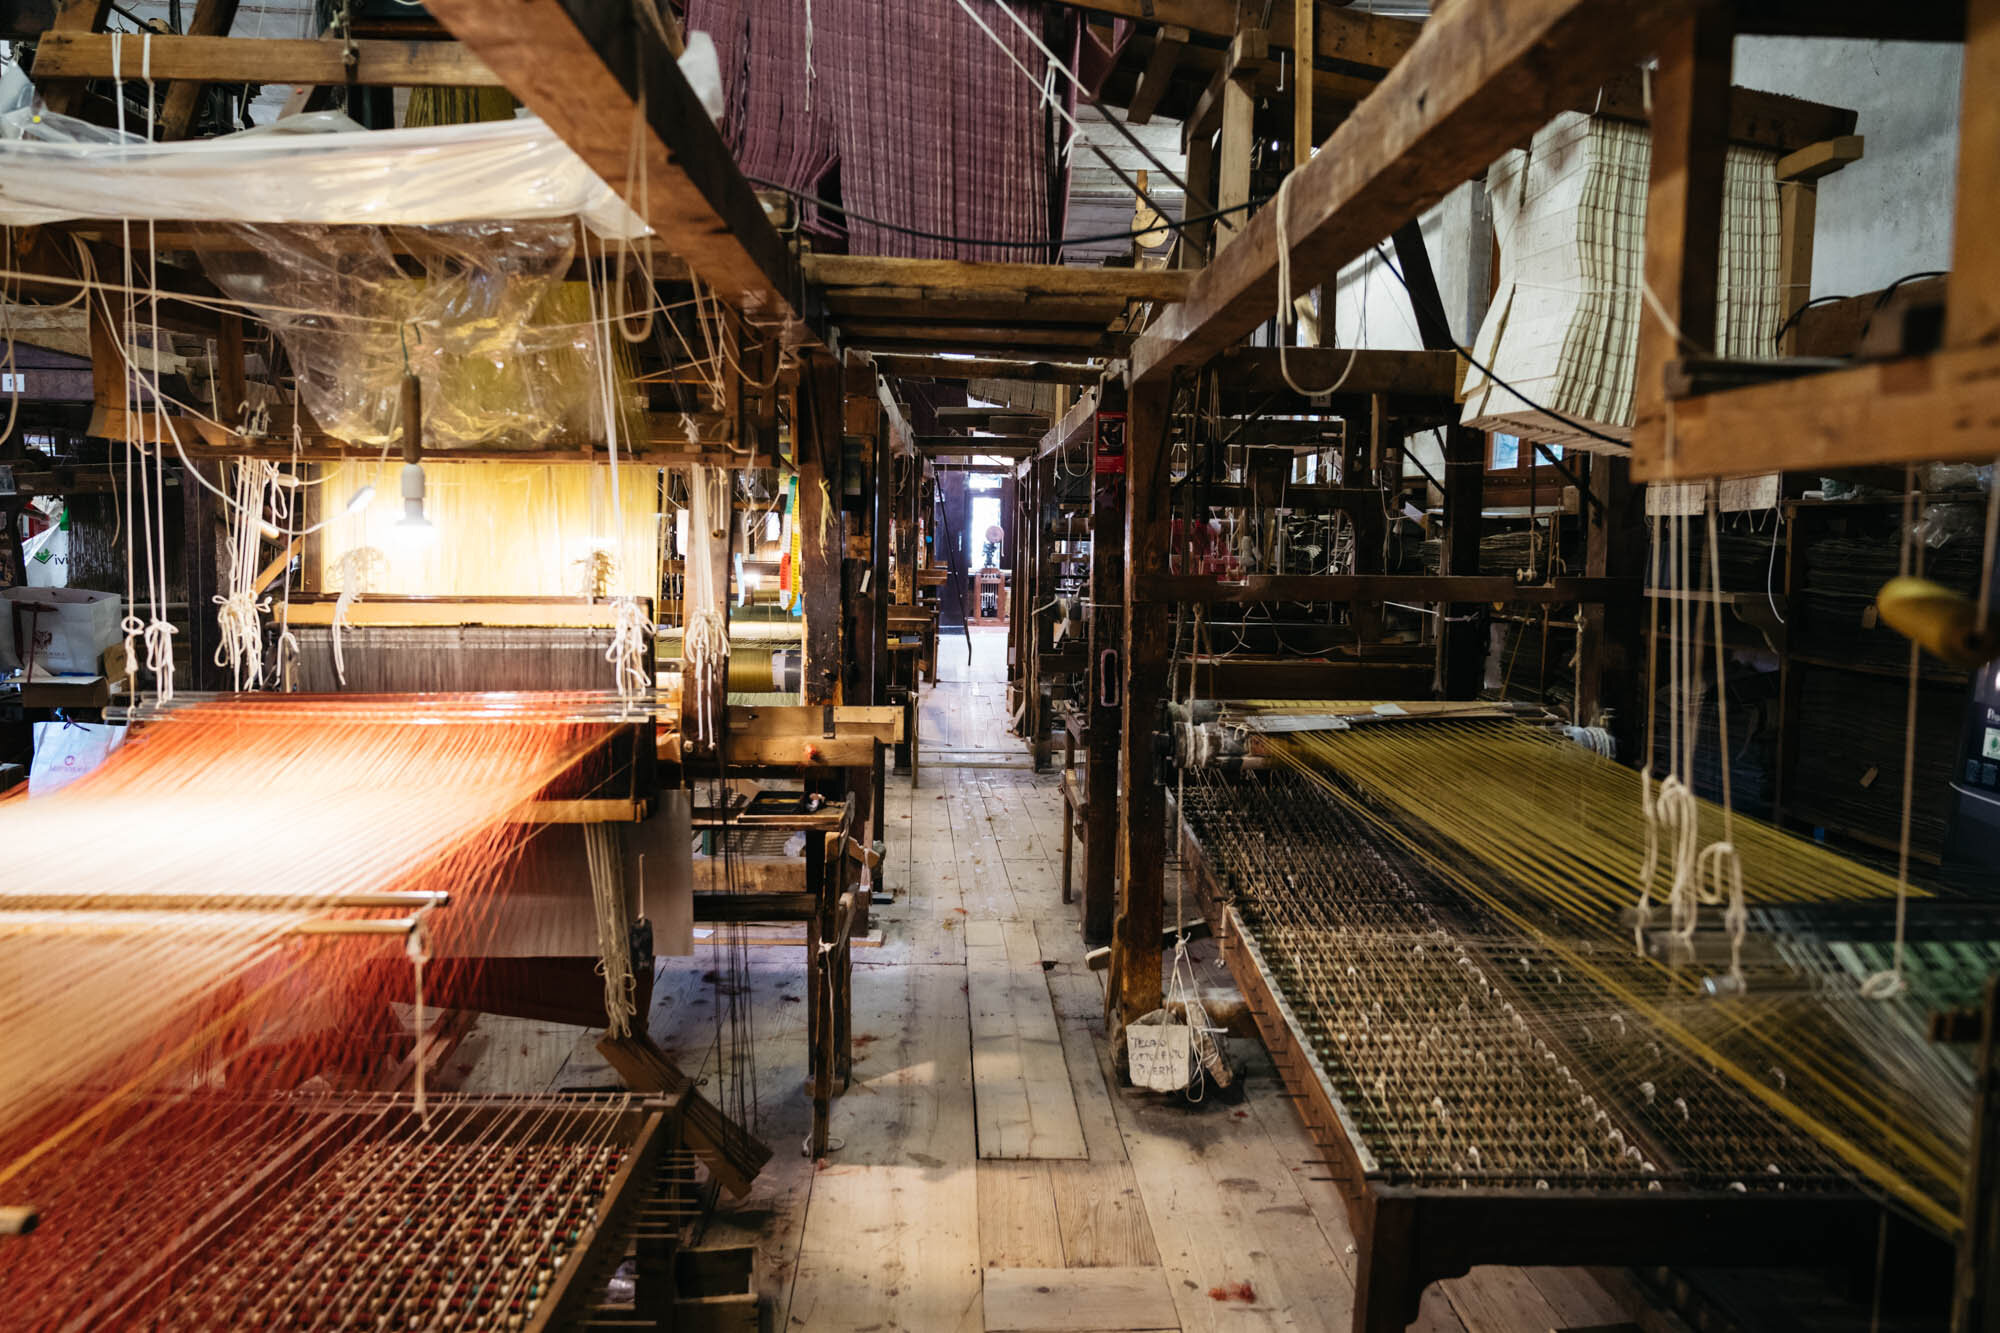  There are around 12 looms in the workshop 